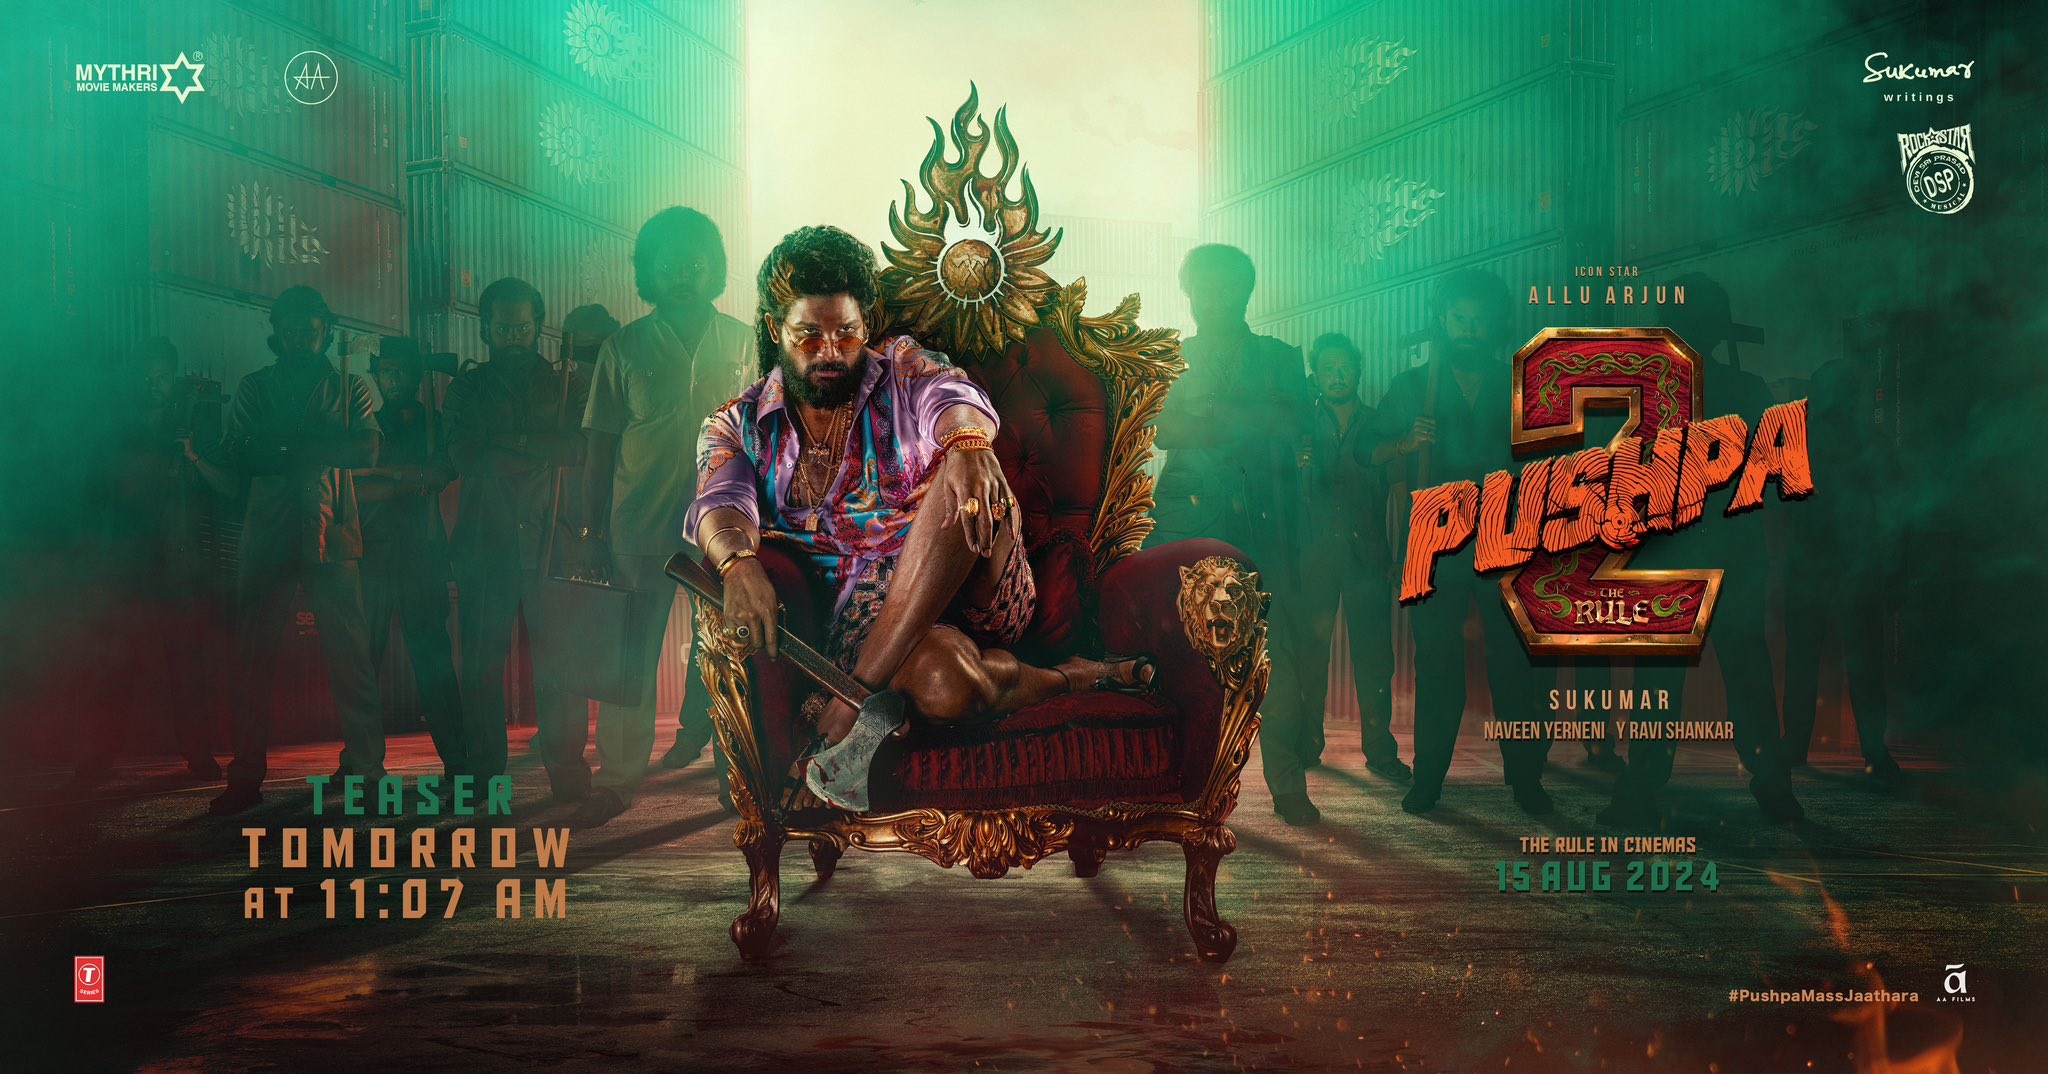 Pushpa 2 The Rule Teaser Drops on 11:07AM on 8th April!